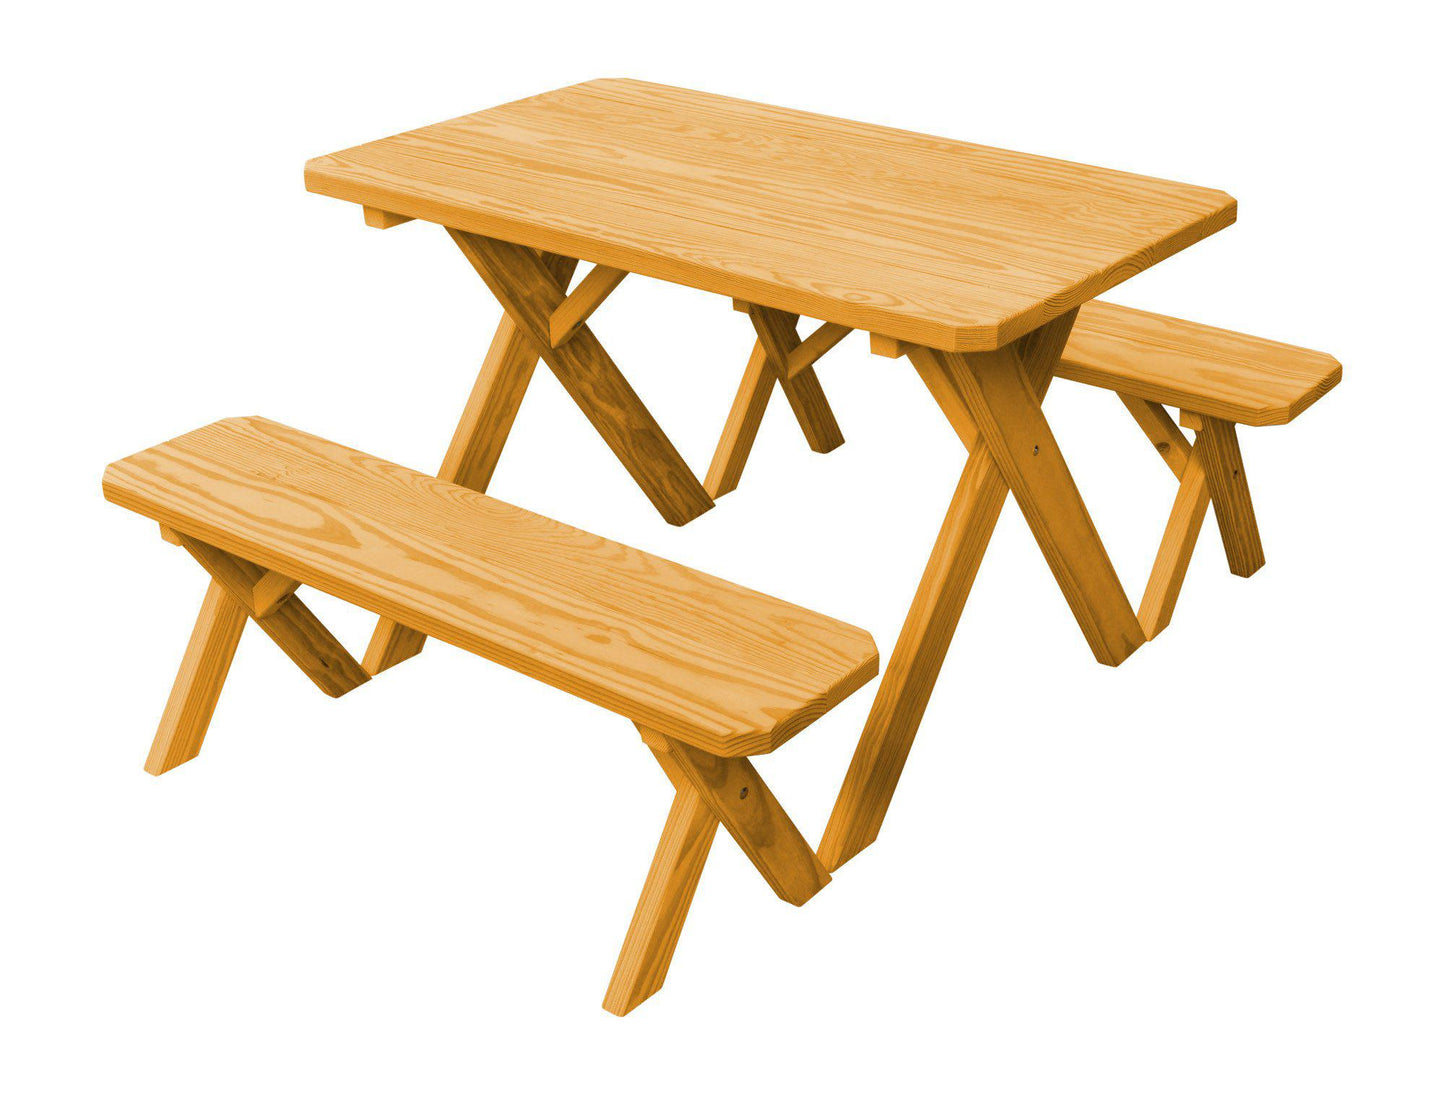 A&L Furniture Co. Yellow Pine 44"' Cross-leg Table w/2 Benches - Umbrella Hole - LEAD TIME TO SHIP 10 BUSINESS DAYS